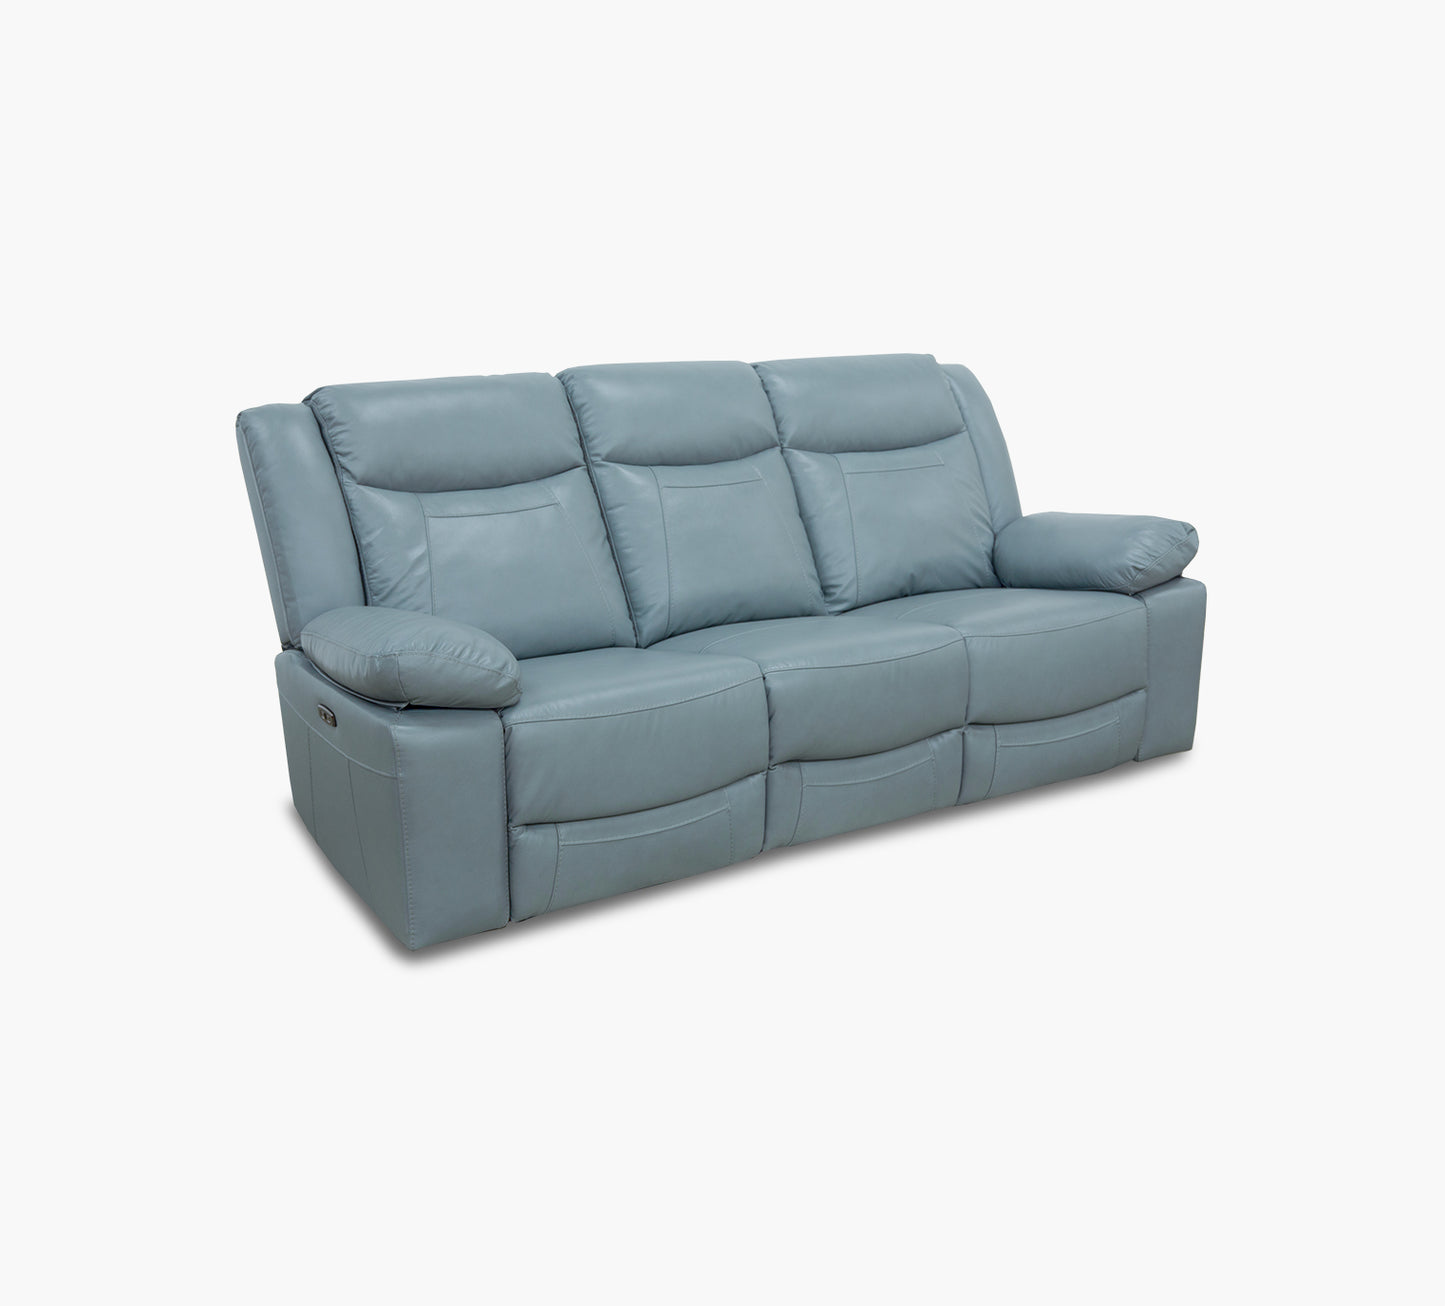 Dallas Teal Leather Reclining Sofa